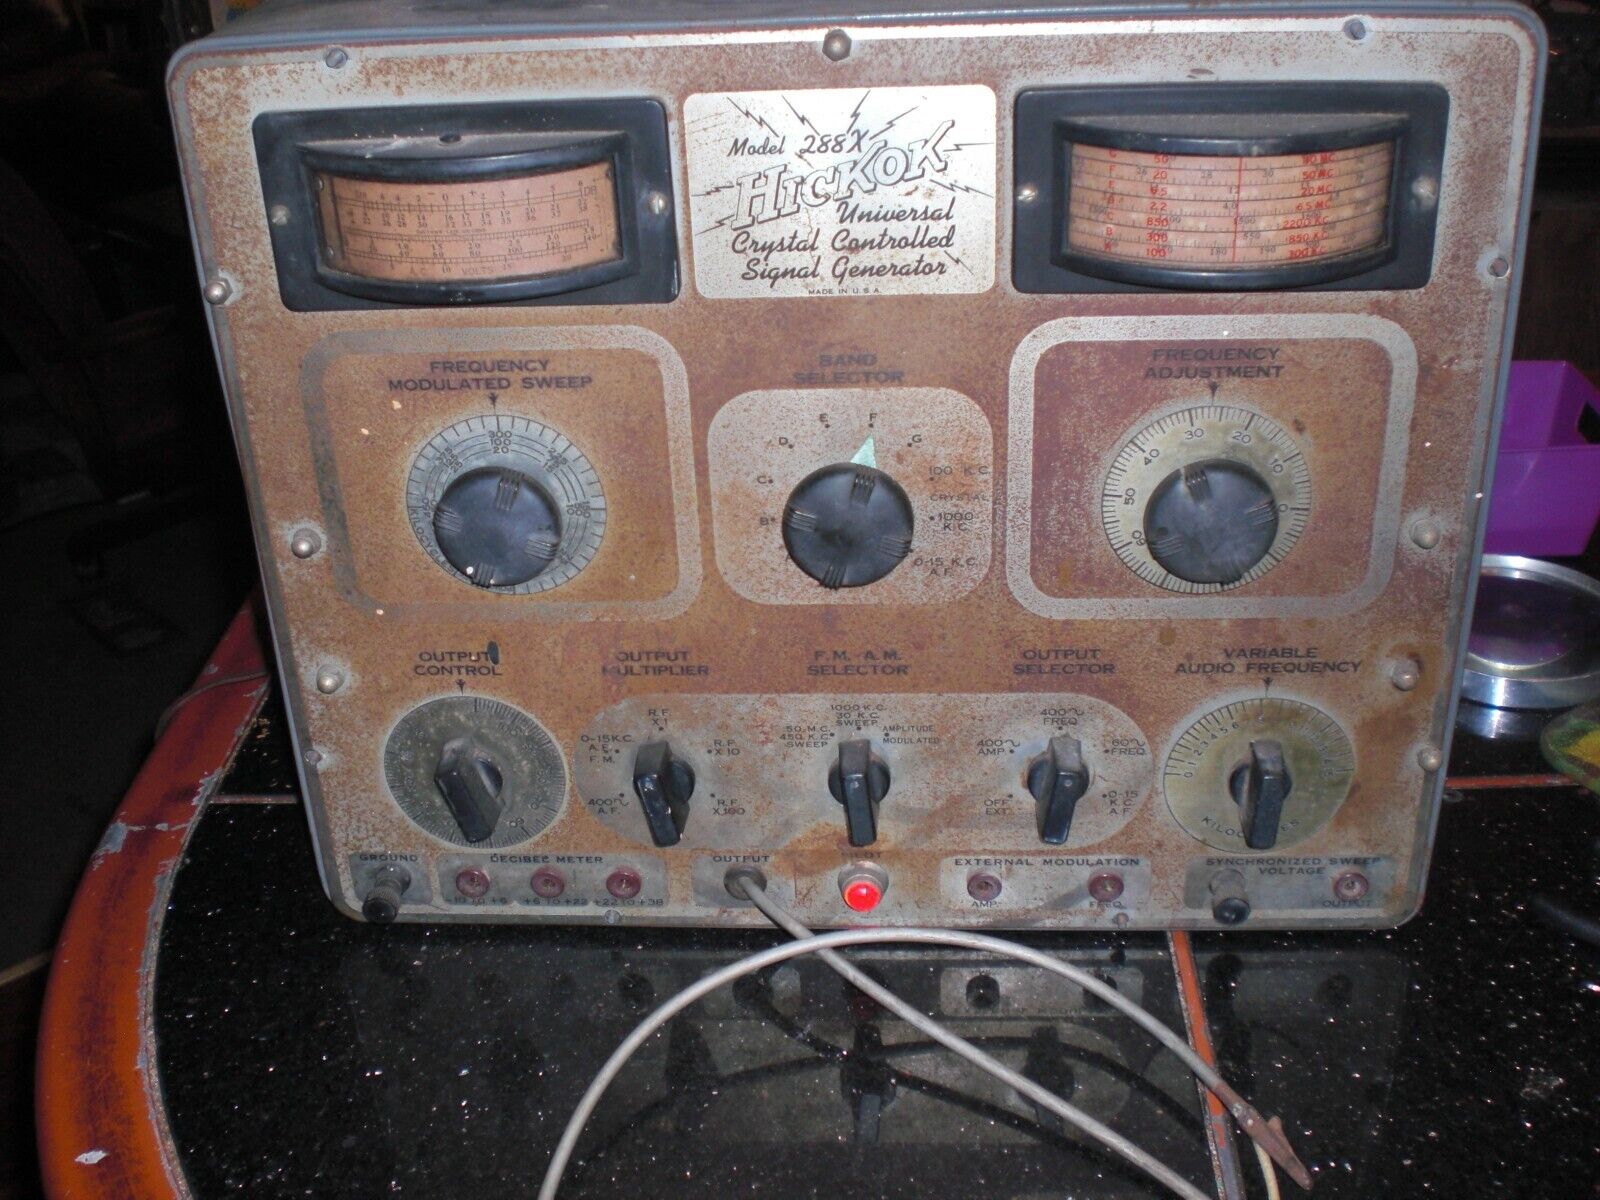 Hickok Model 288X Universal Crystal Controlled Signal Generator ESTATE FIND